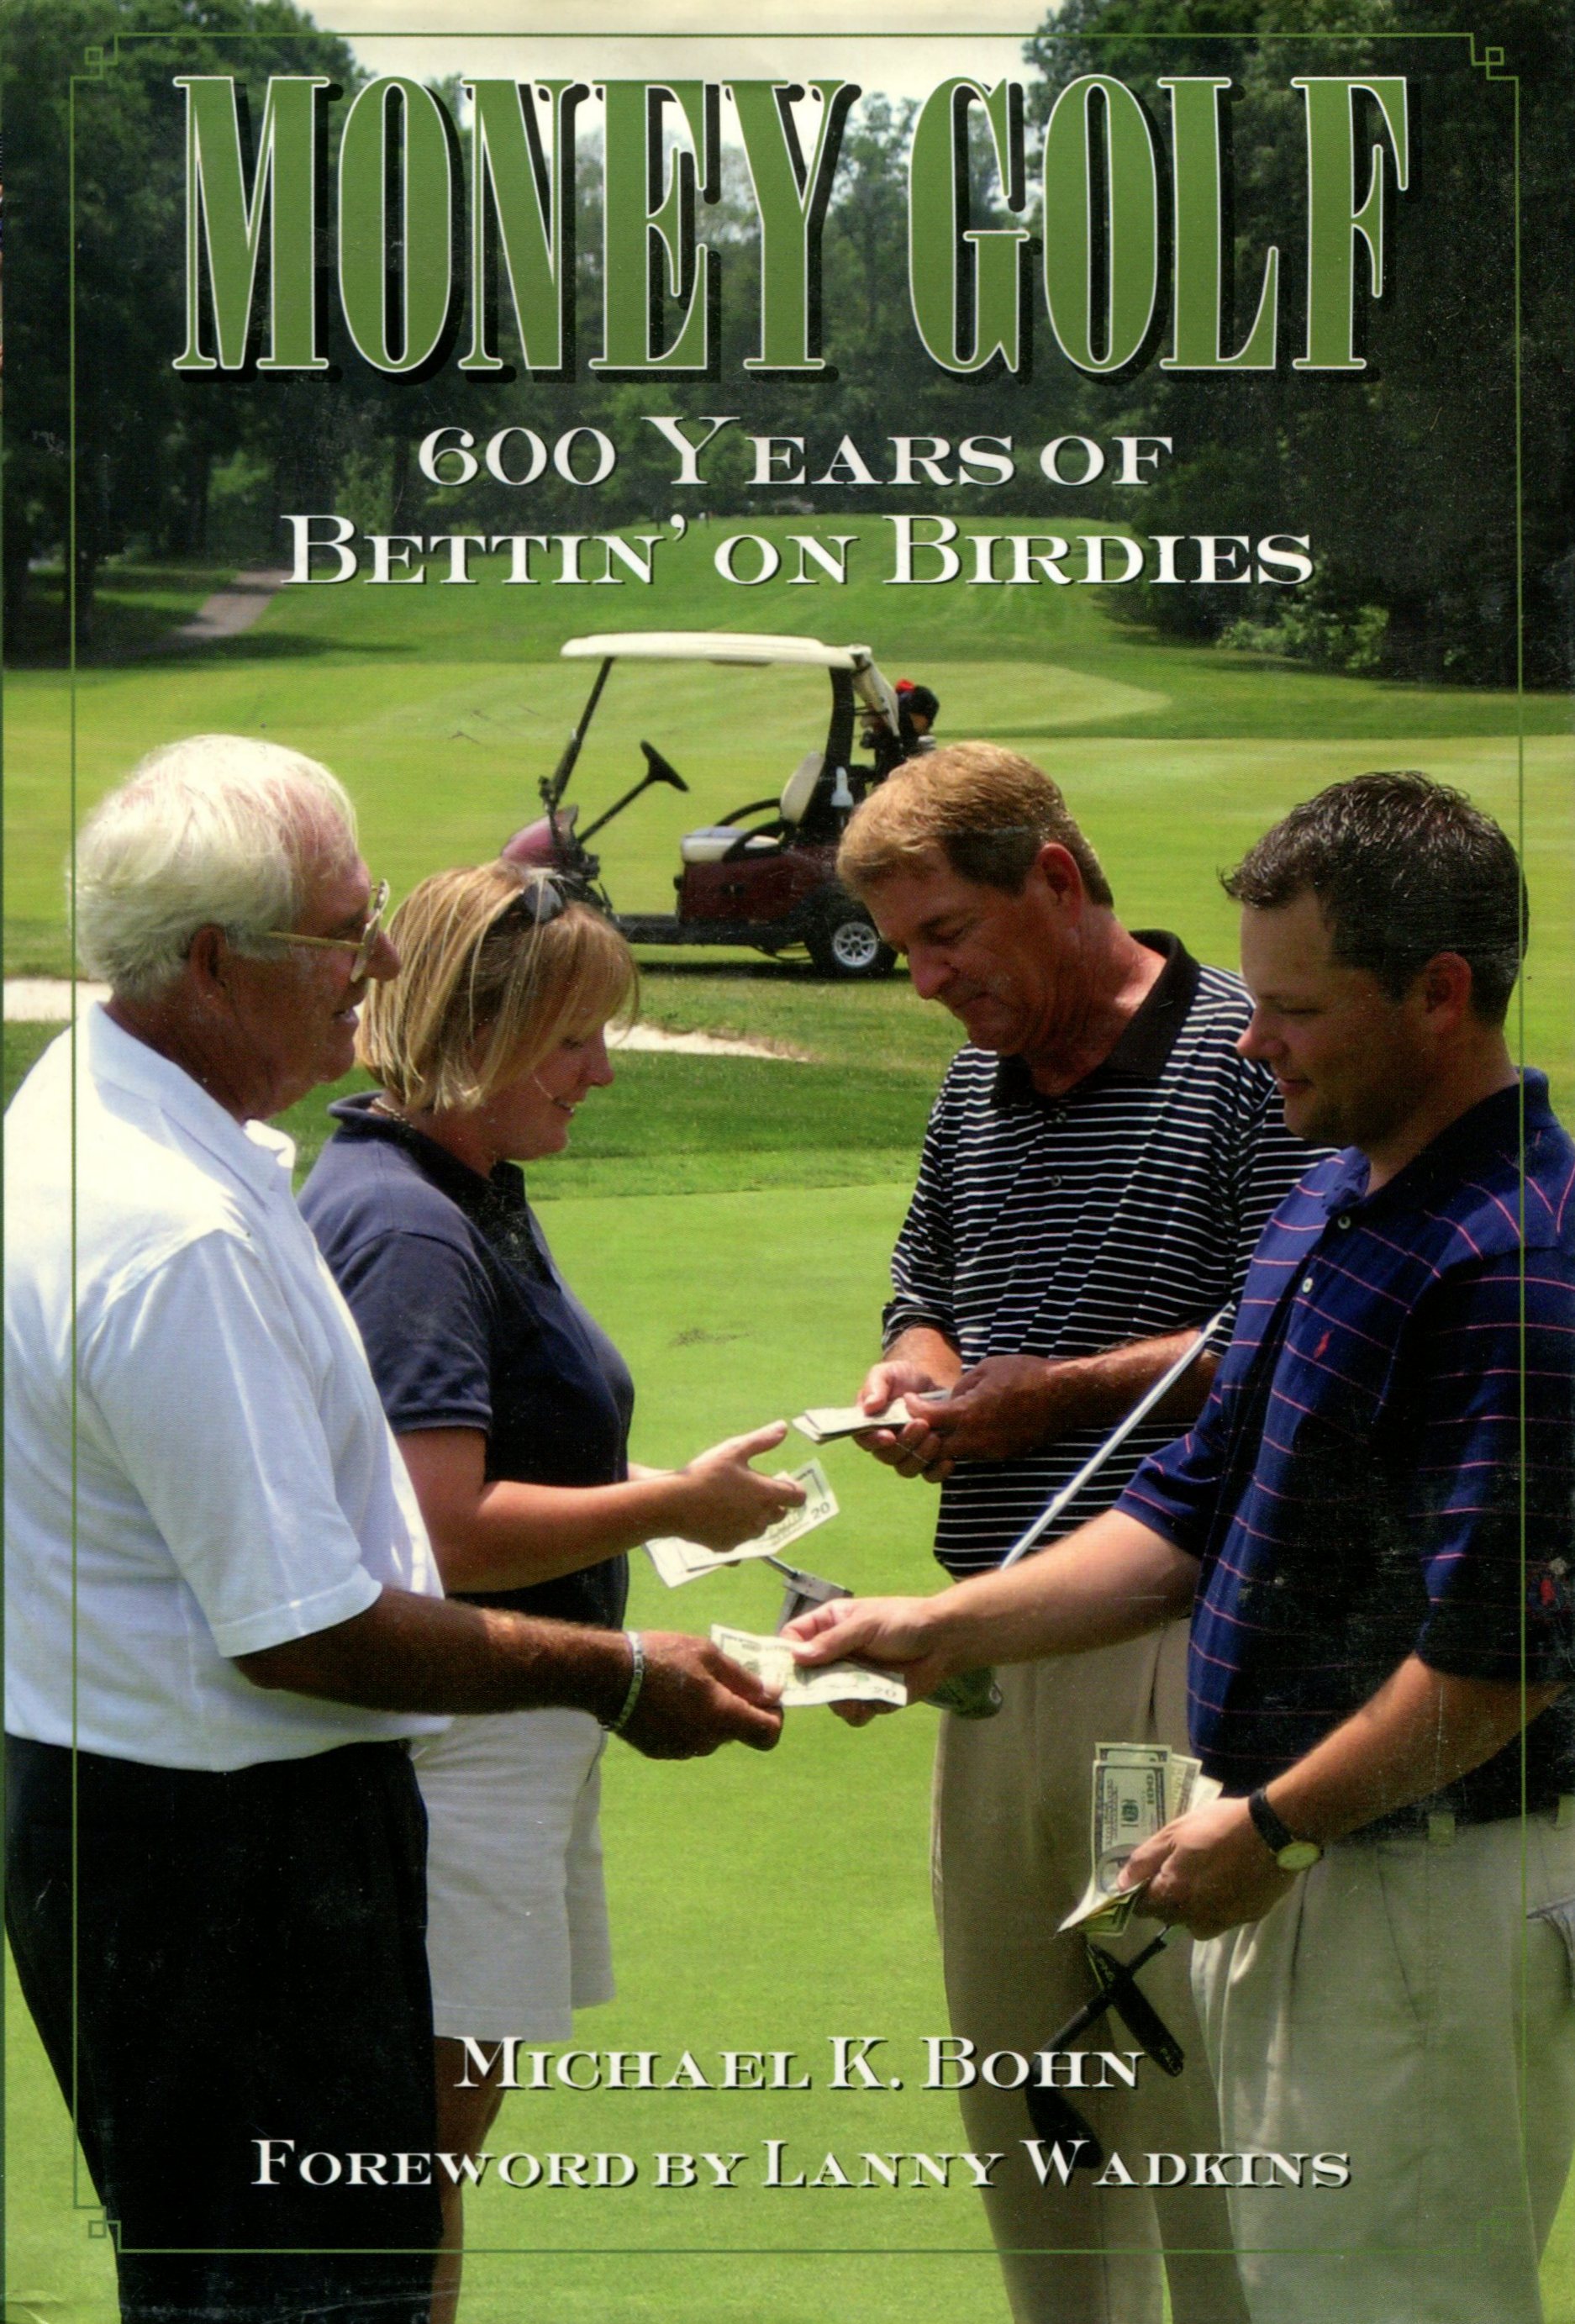 A photo of the cover of Michael Bohn's book "Money Golf"